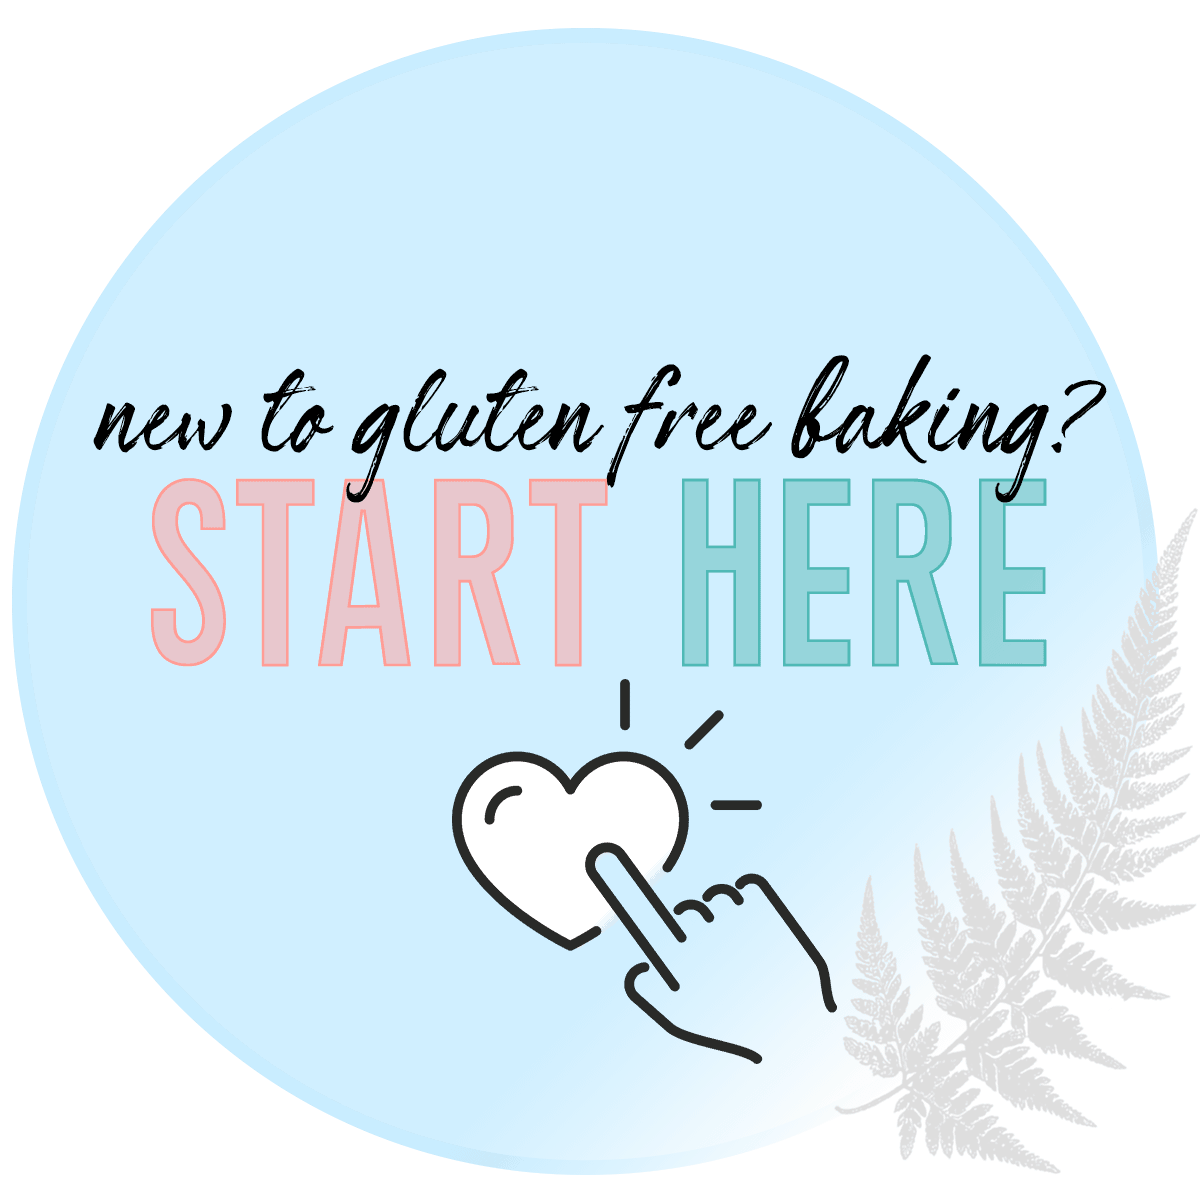 Text in a blue circle reading "new to gluten free baking? Start here."